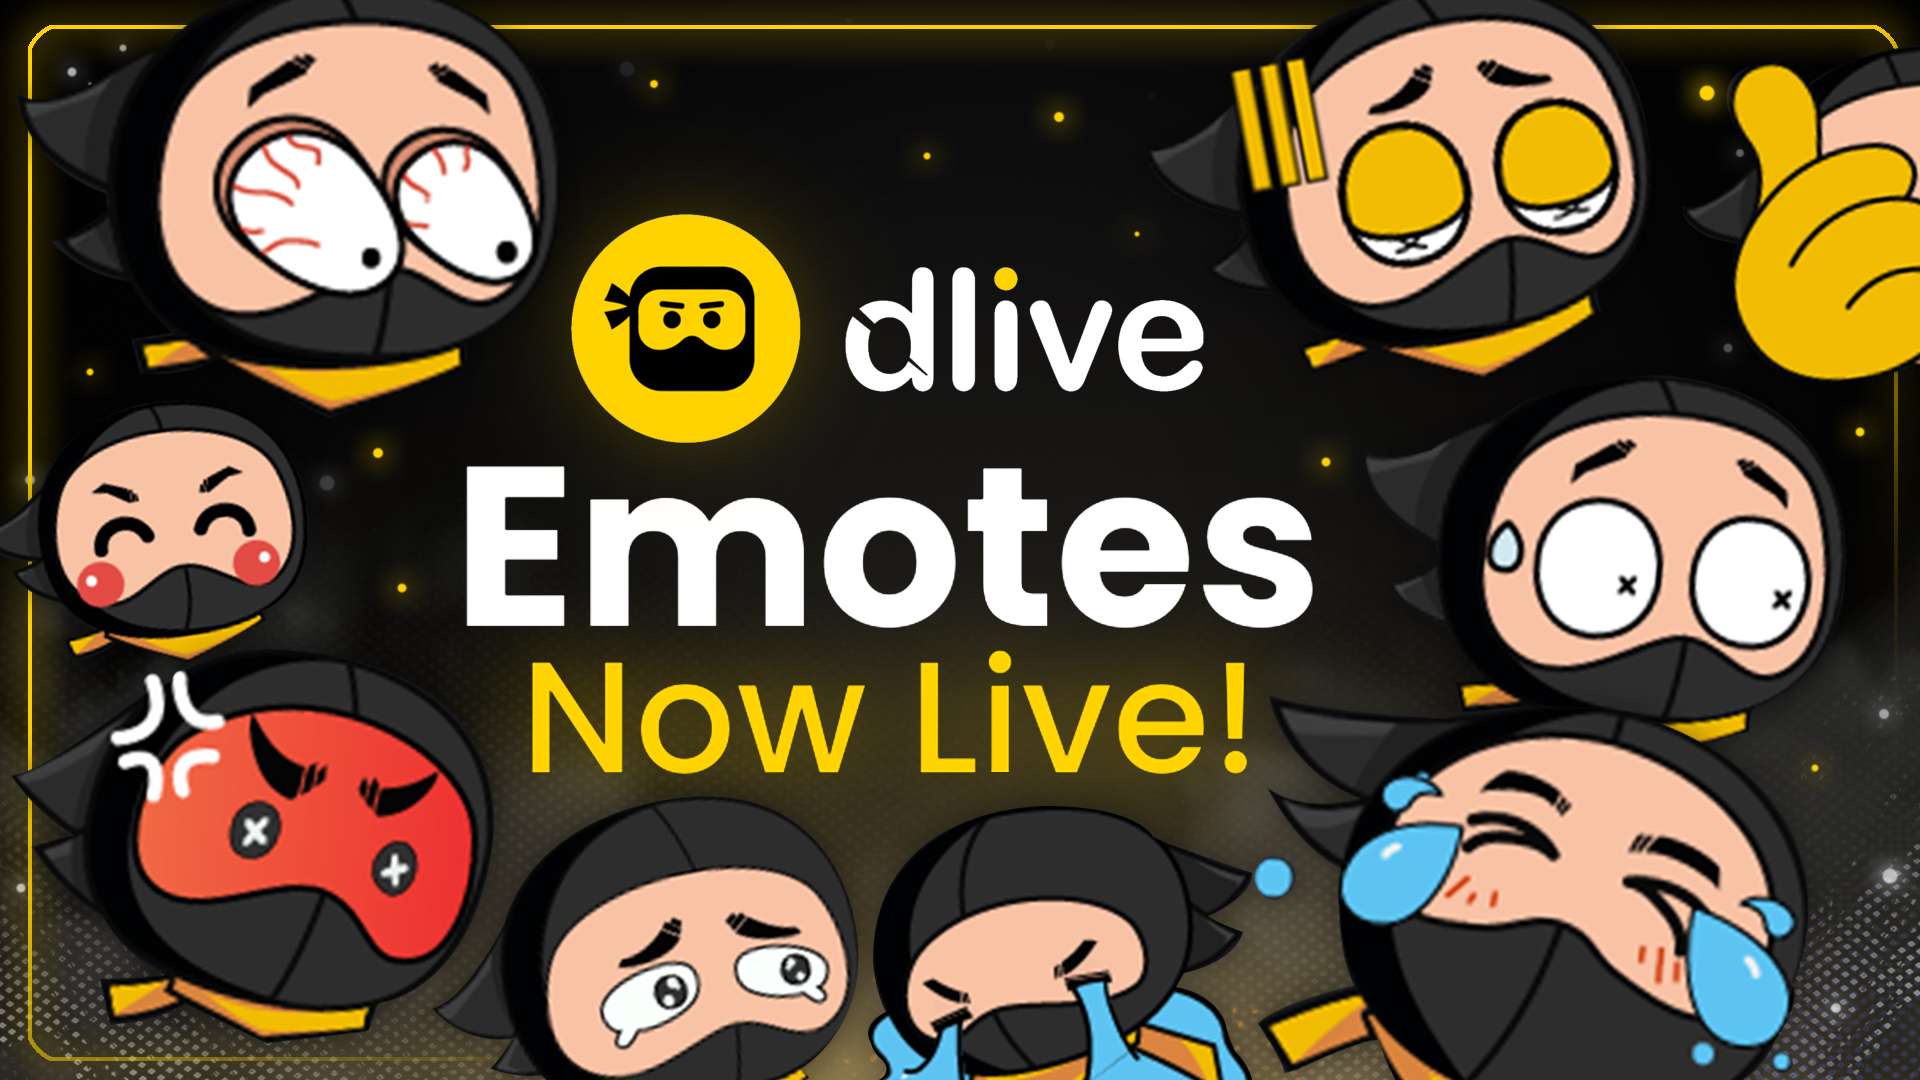 DLive new emote feature